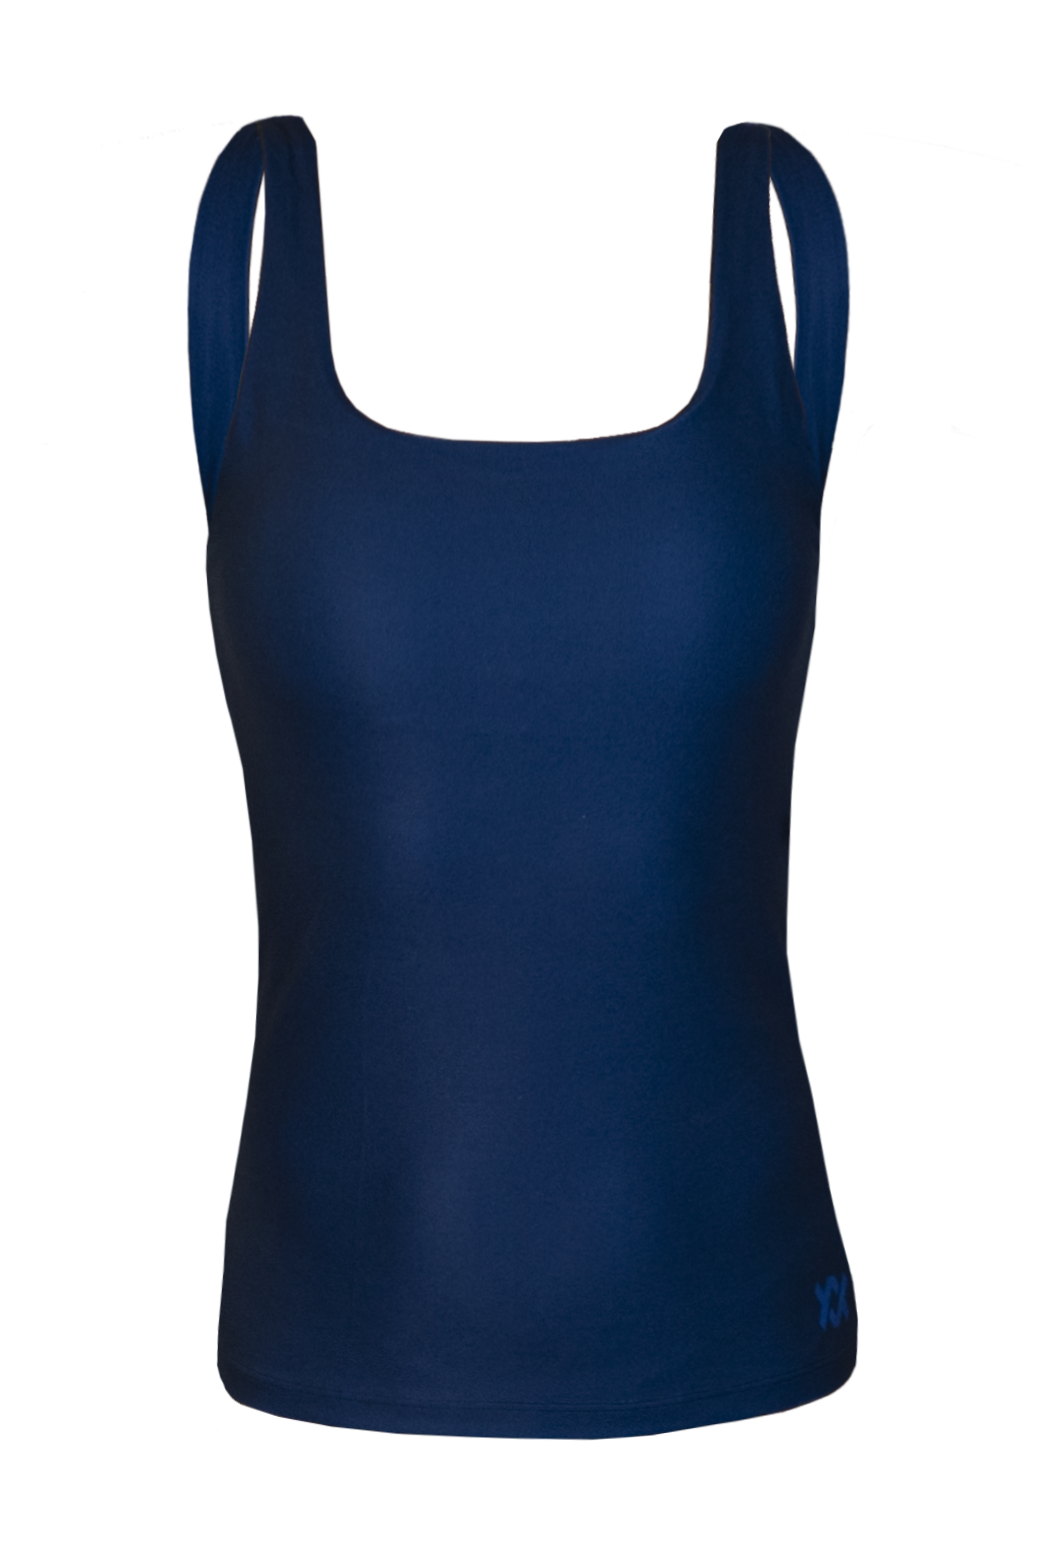 Solid Tank Top with Thin Straps